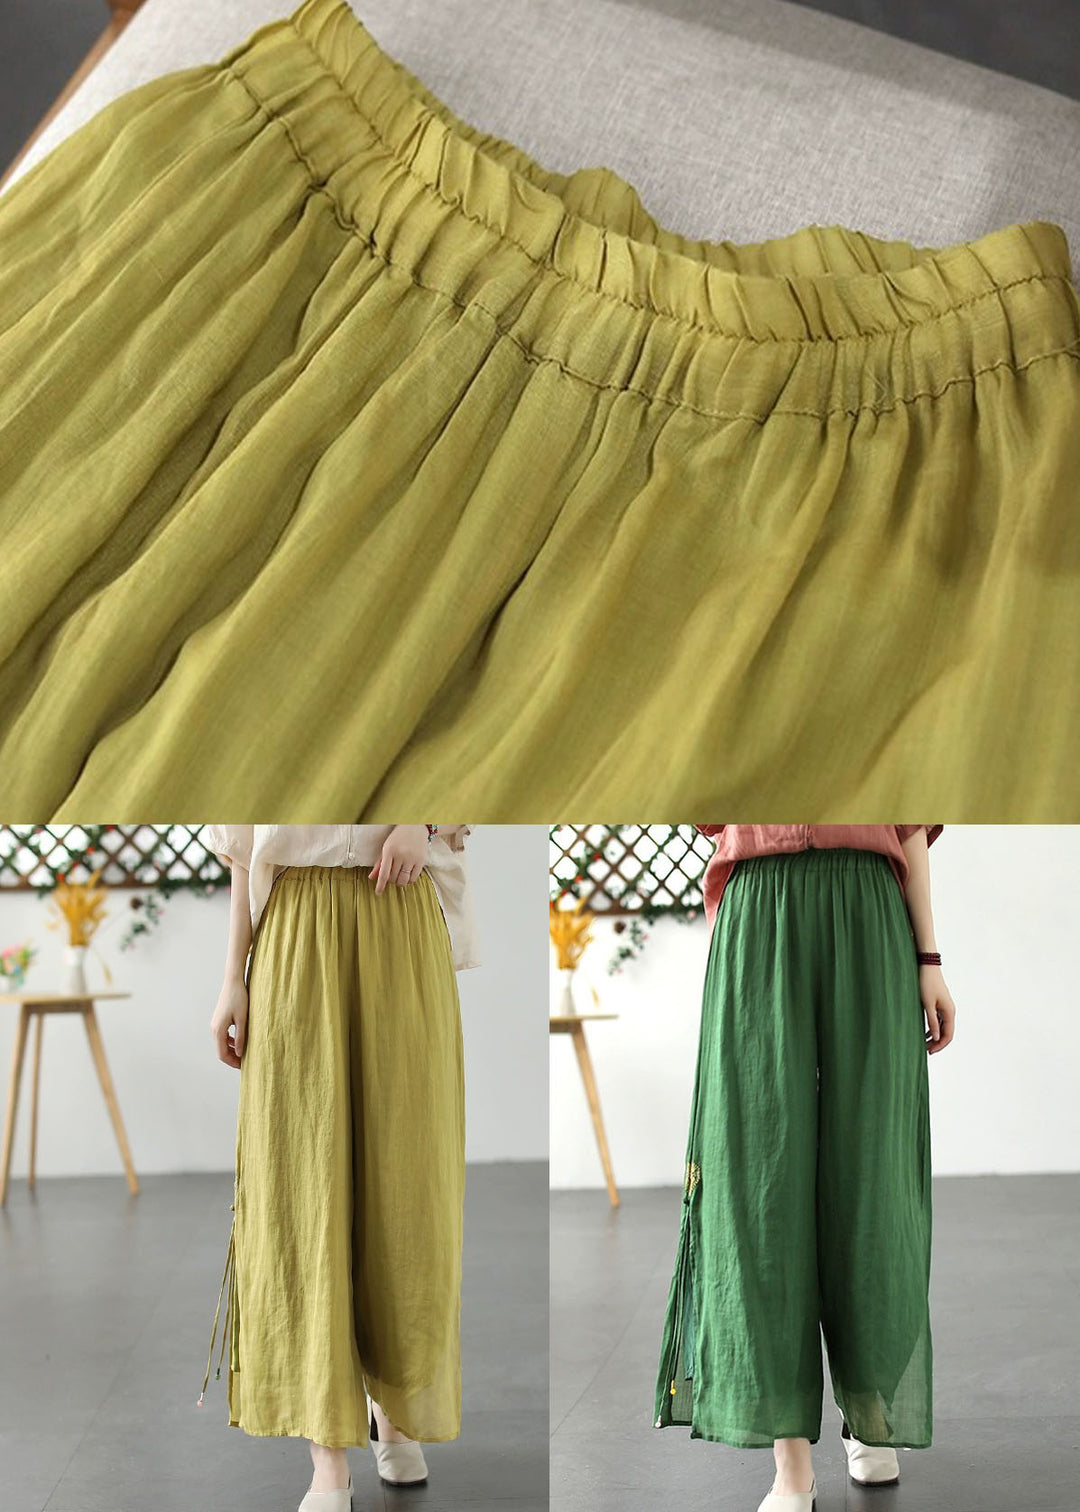 Plus Size Yellow Embroideried Patchwork Linen Wide Leg Pants Summer